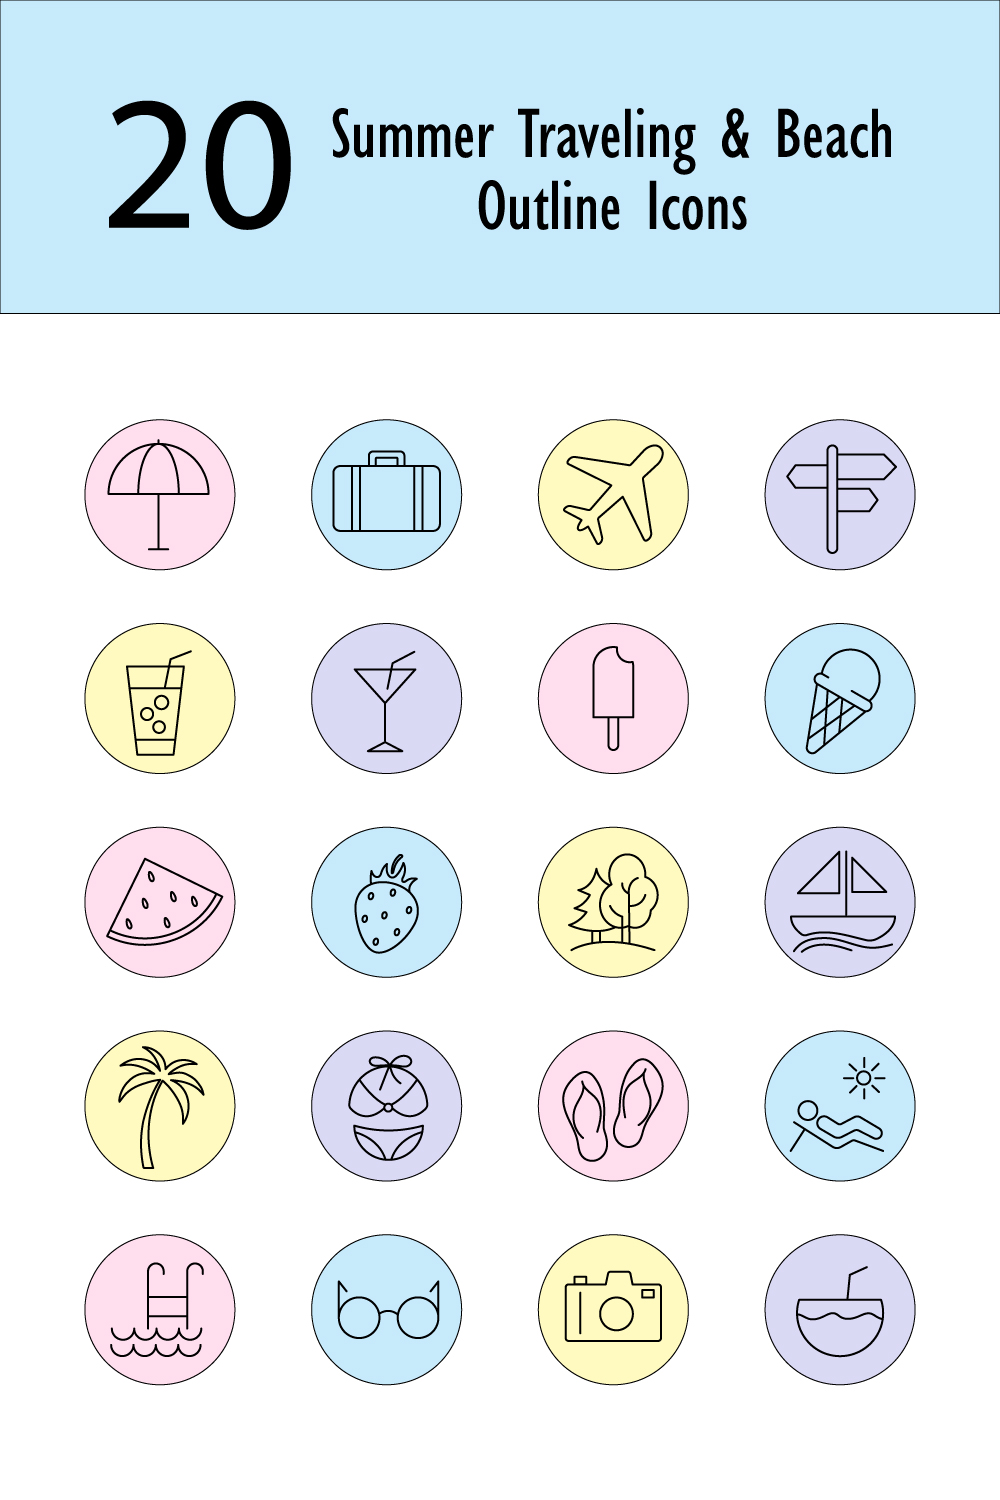 20 Summer traveling and beach outline icons pinterest preview image.